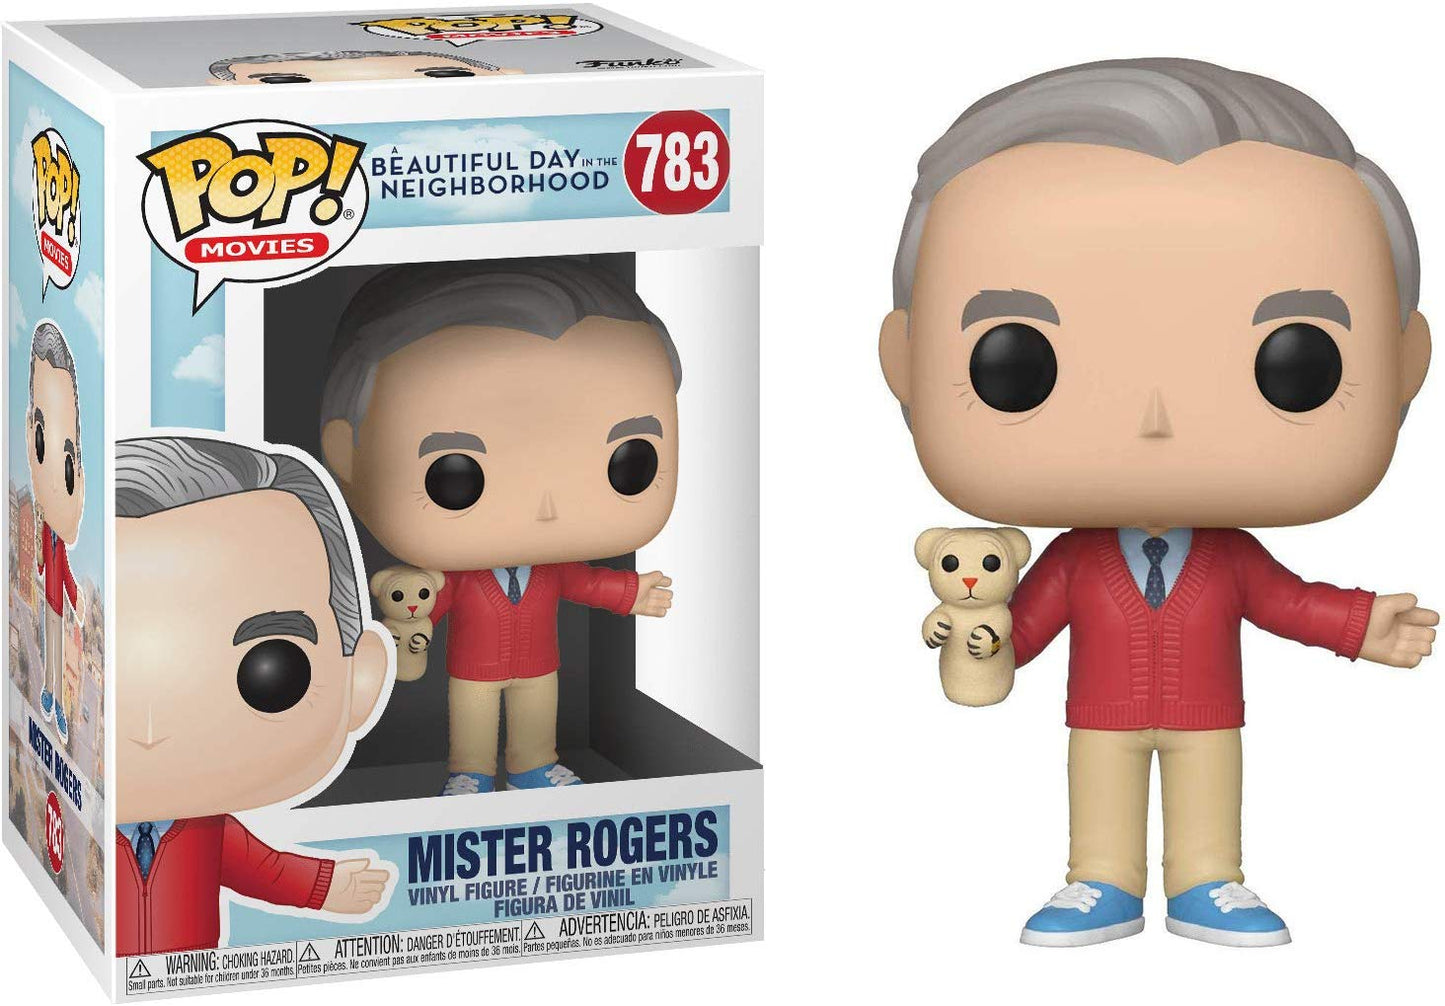 Pop! Movies A Beautiful Day in the Neighborhood Vinyl Figure Mister Rogers #783